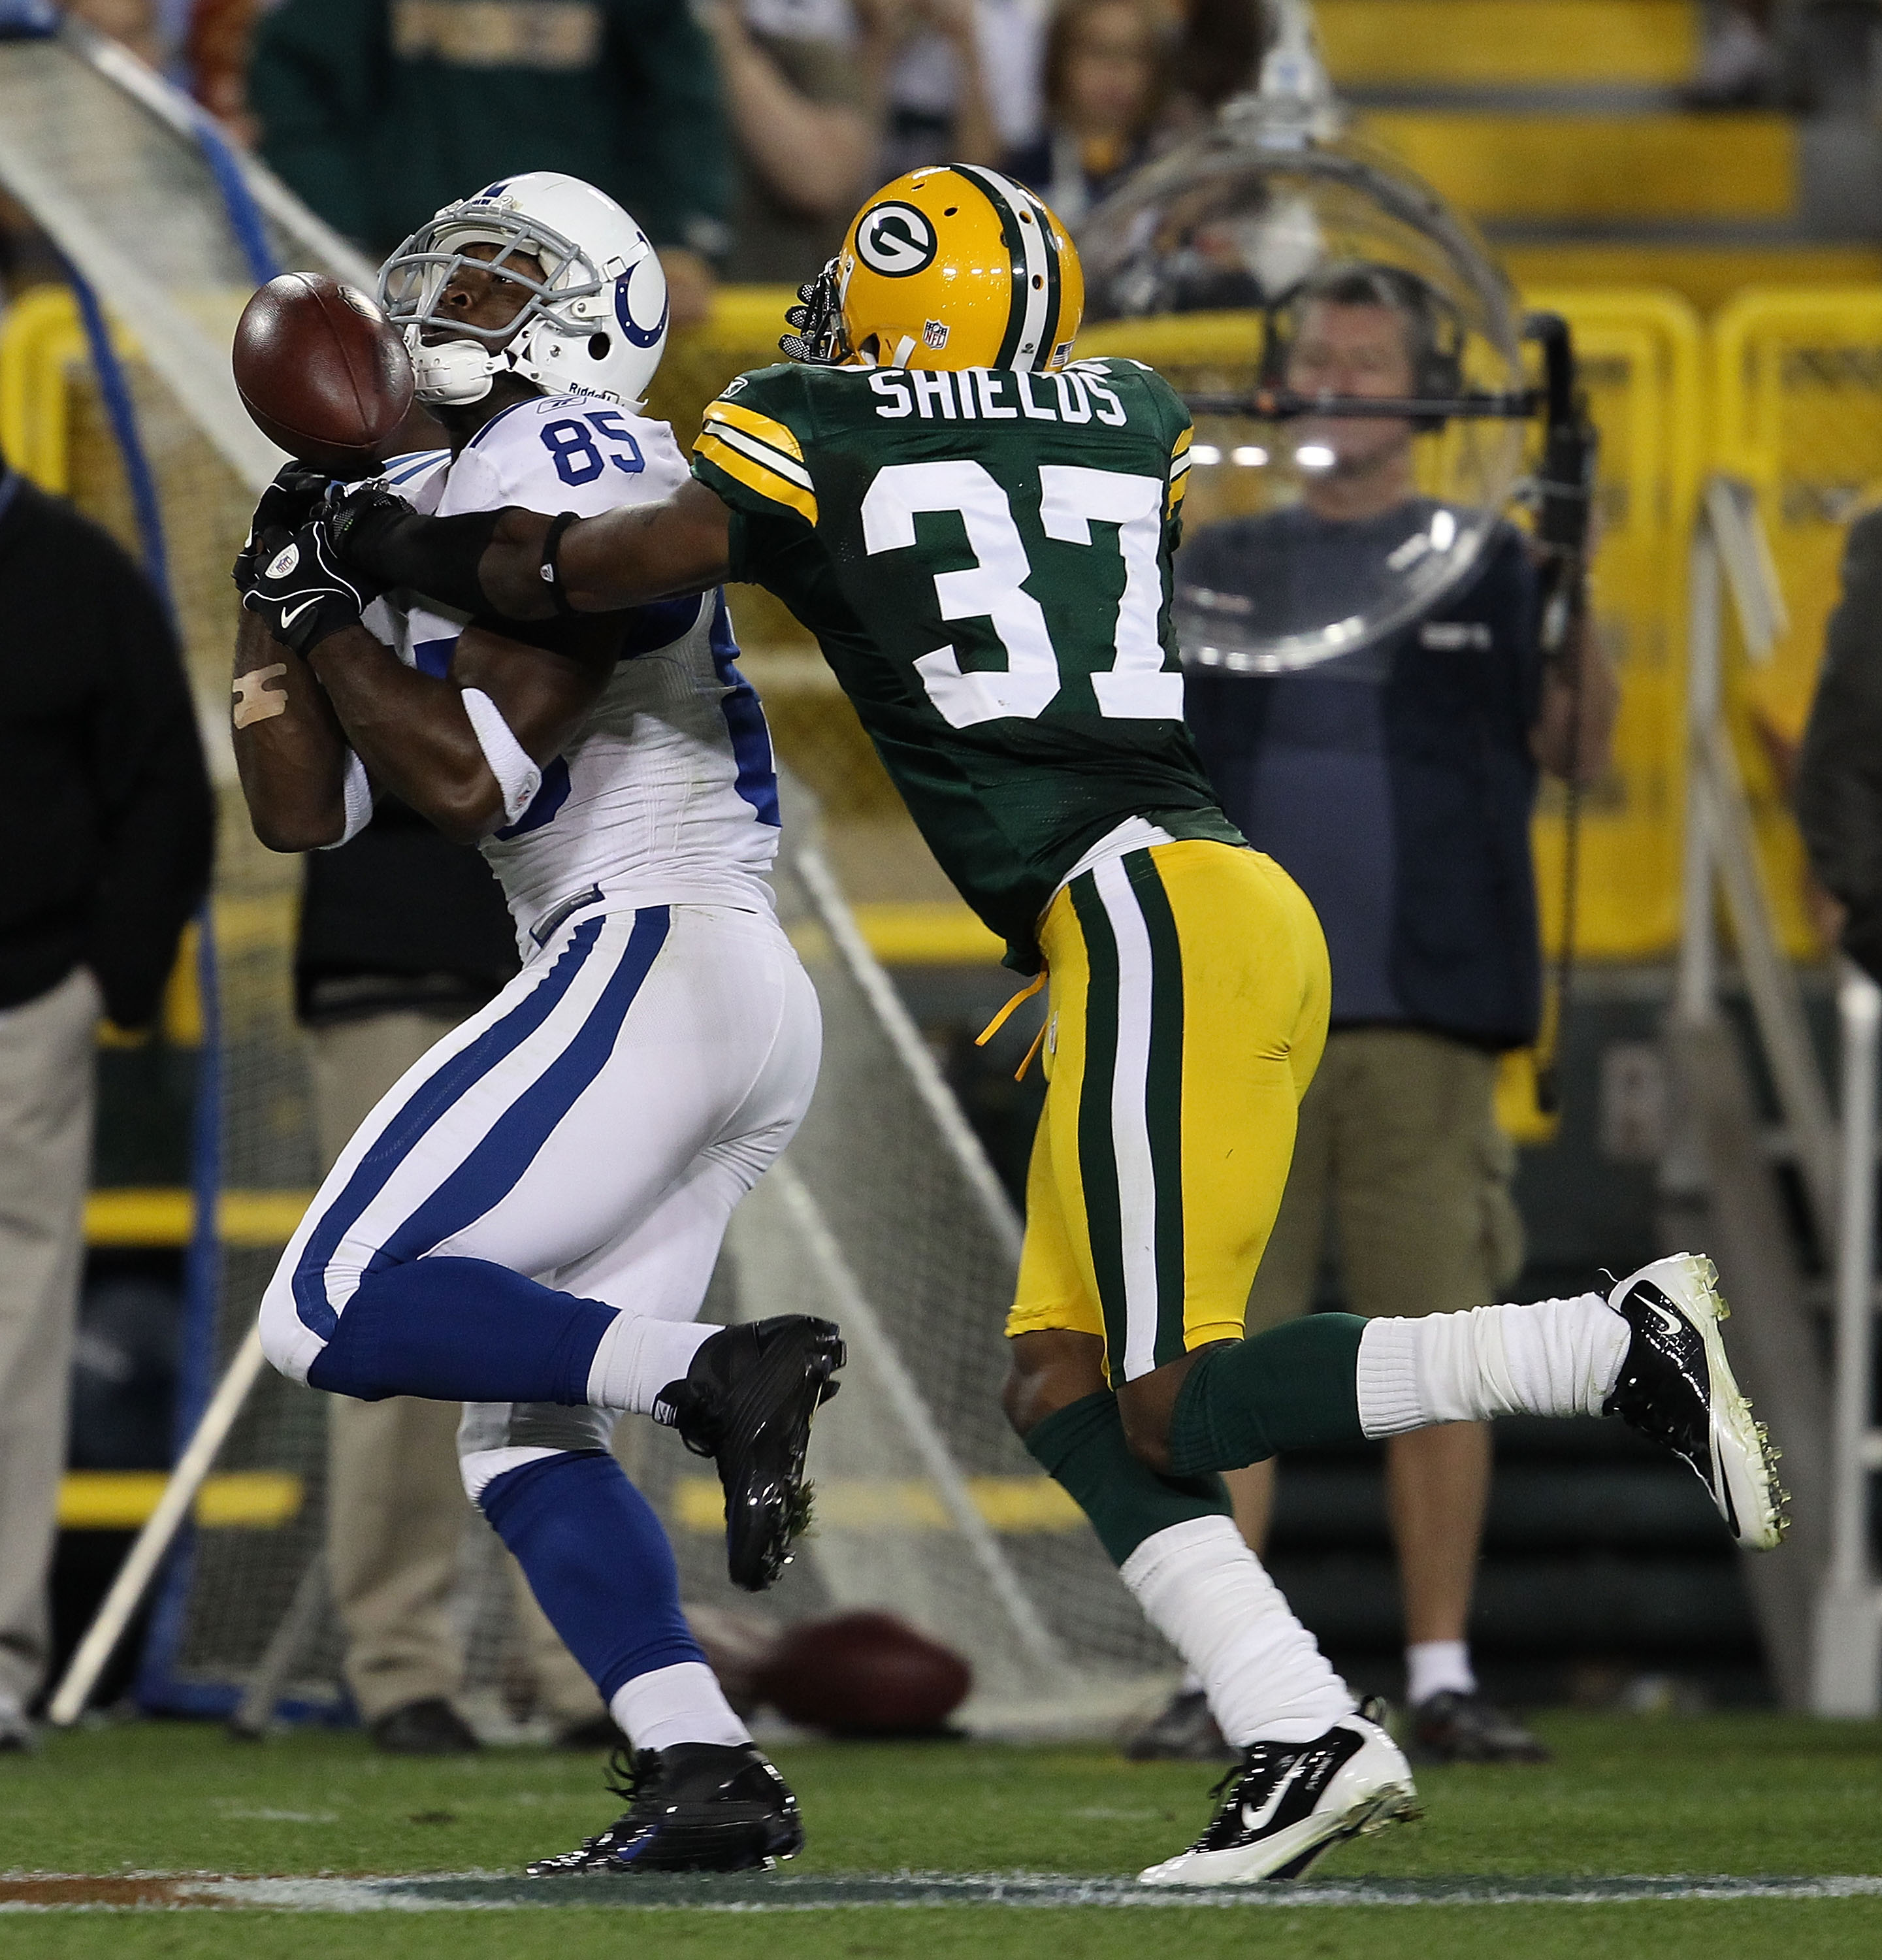 GREEN BAY, WI - AUGUST 26: Sam Shields #37 of the Green Bay Packers breaks up a pass intended for Pierre Garcon #85 of the Indianapolis Colts during a preseason game at Lambeau Field on August 26, 2010 in Green Bay, Wisconsin. The Packers defeated the Col